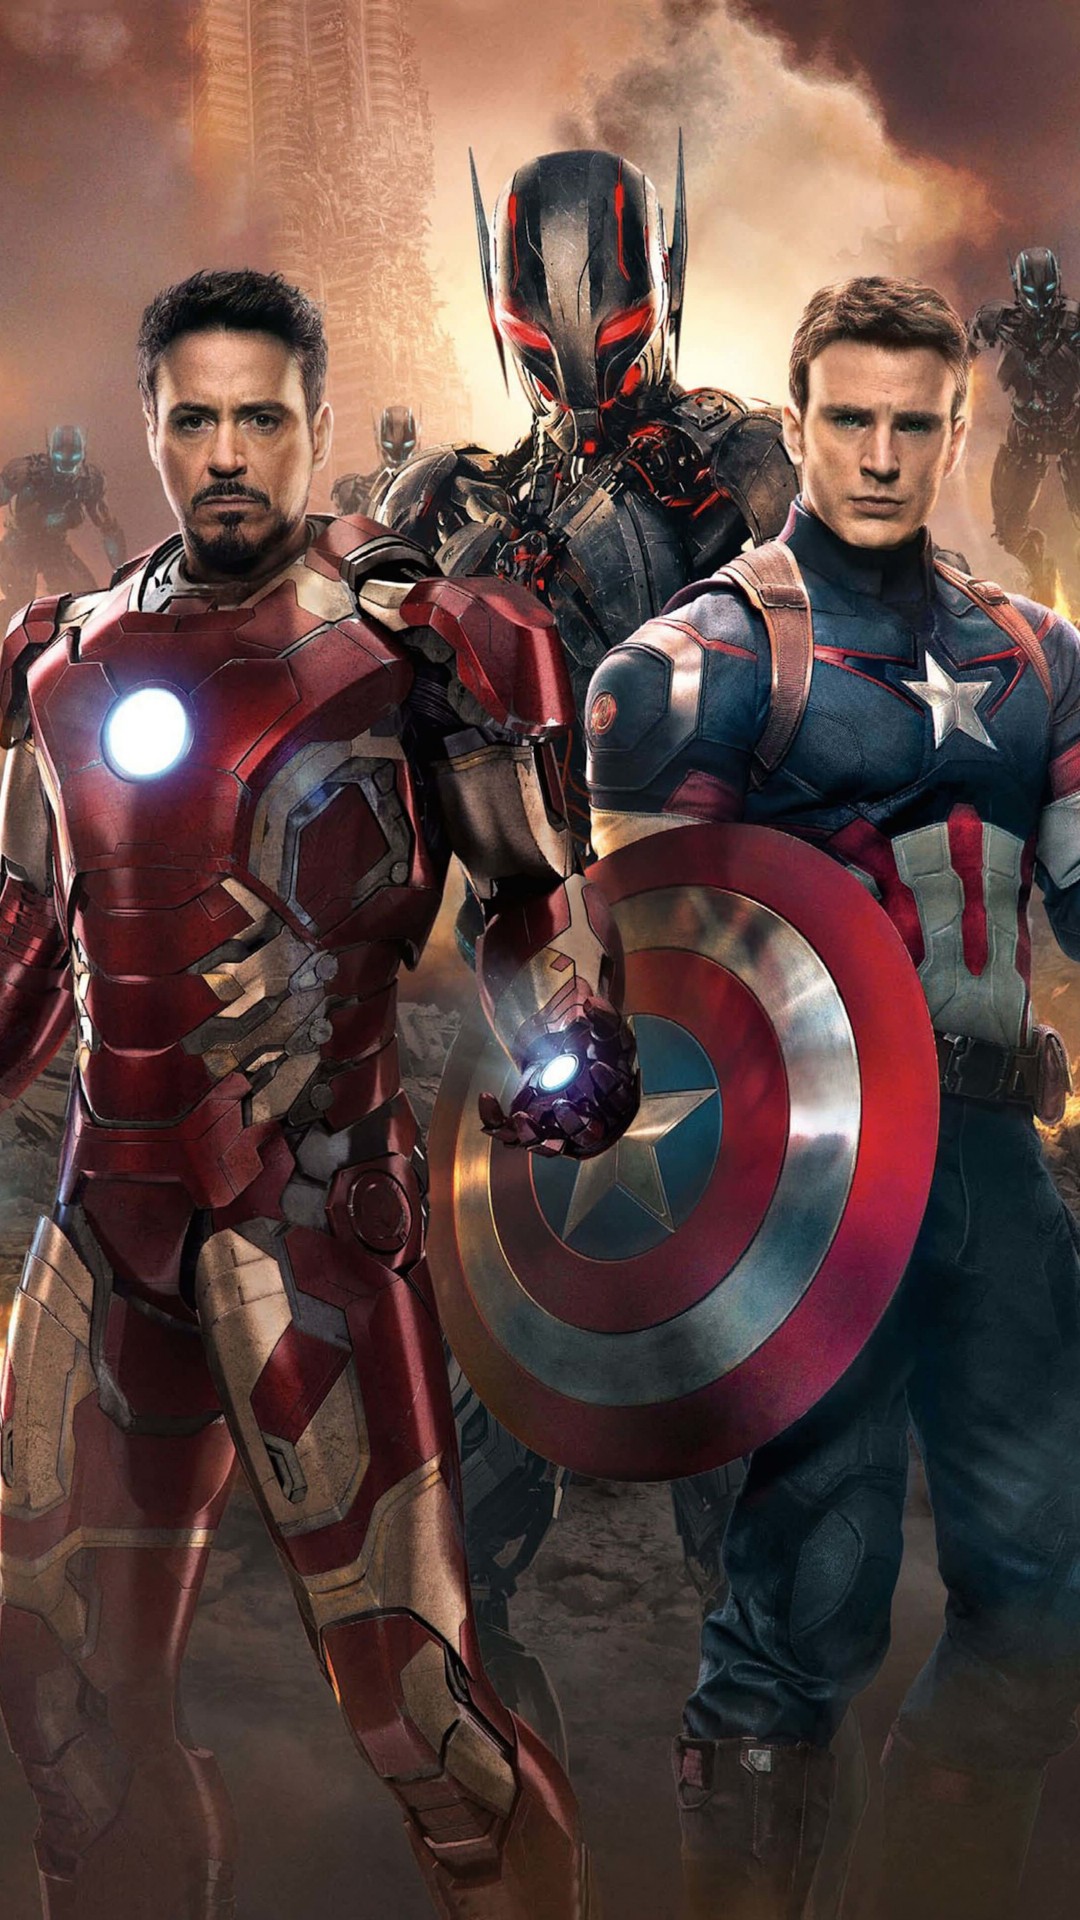 The Avengers: Age of Ultron - Iron Man and Captain America Wallpaper for Motorola Moto X